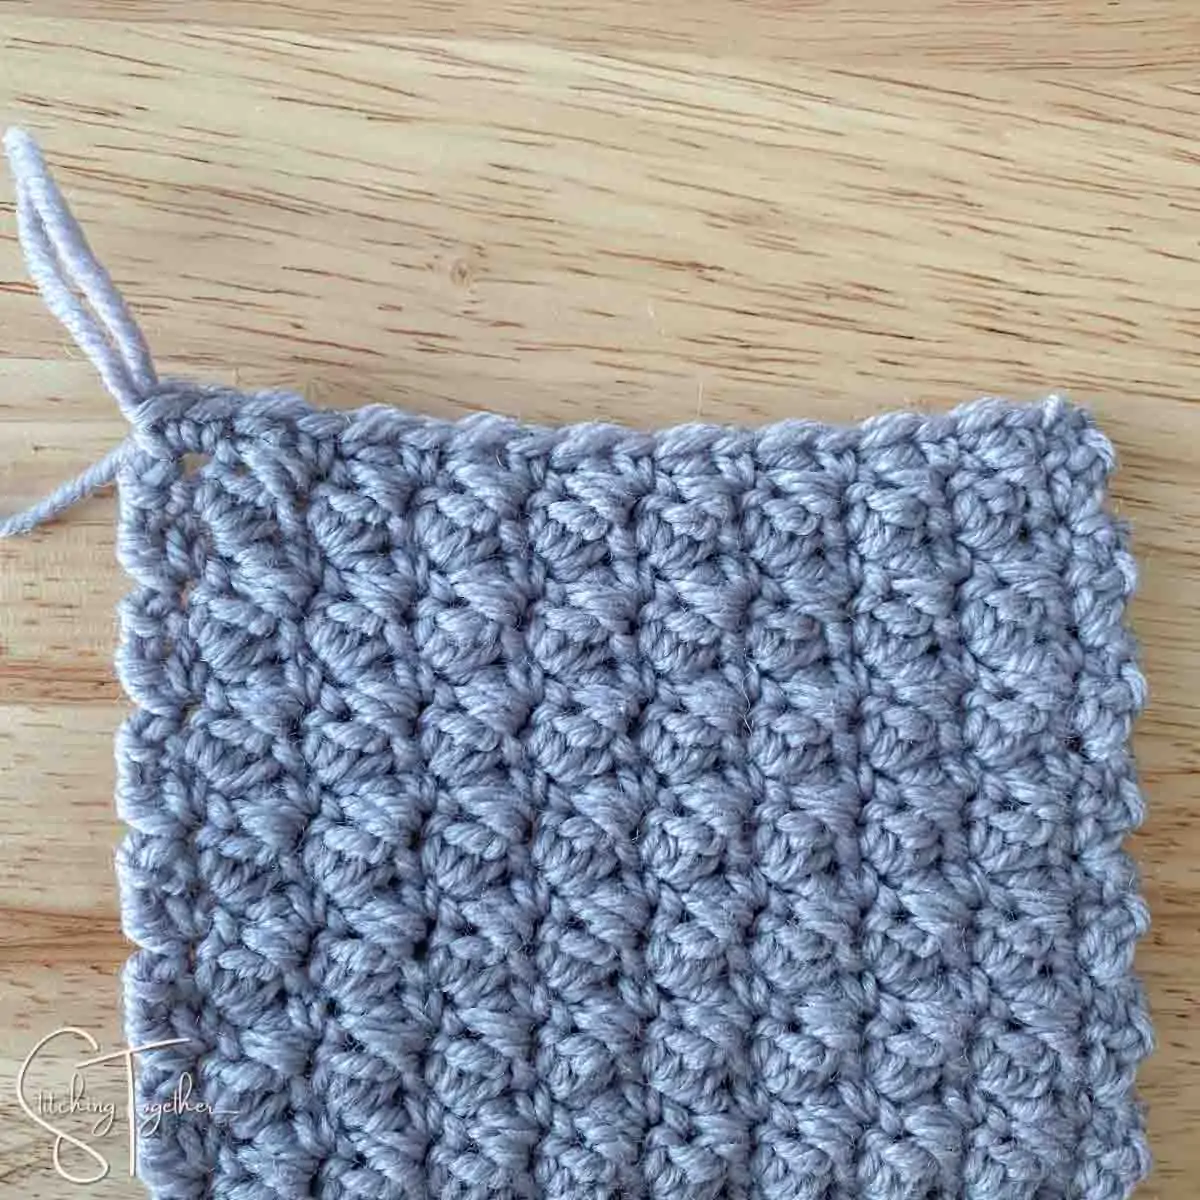 How to Crochet the Suzette Stitch (Easy Tutorial & Pattern